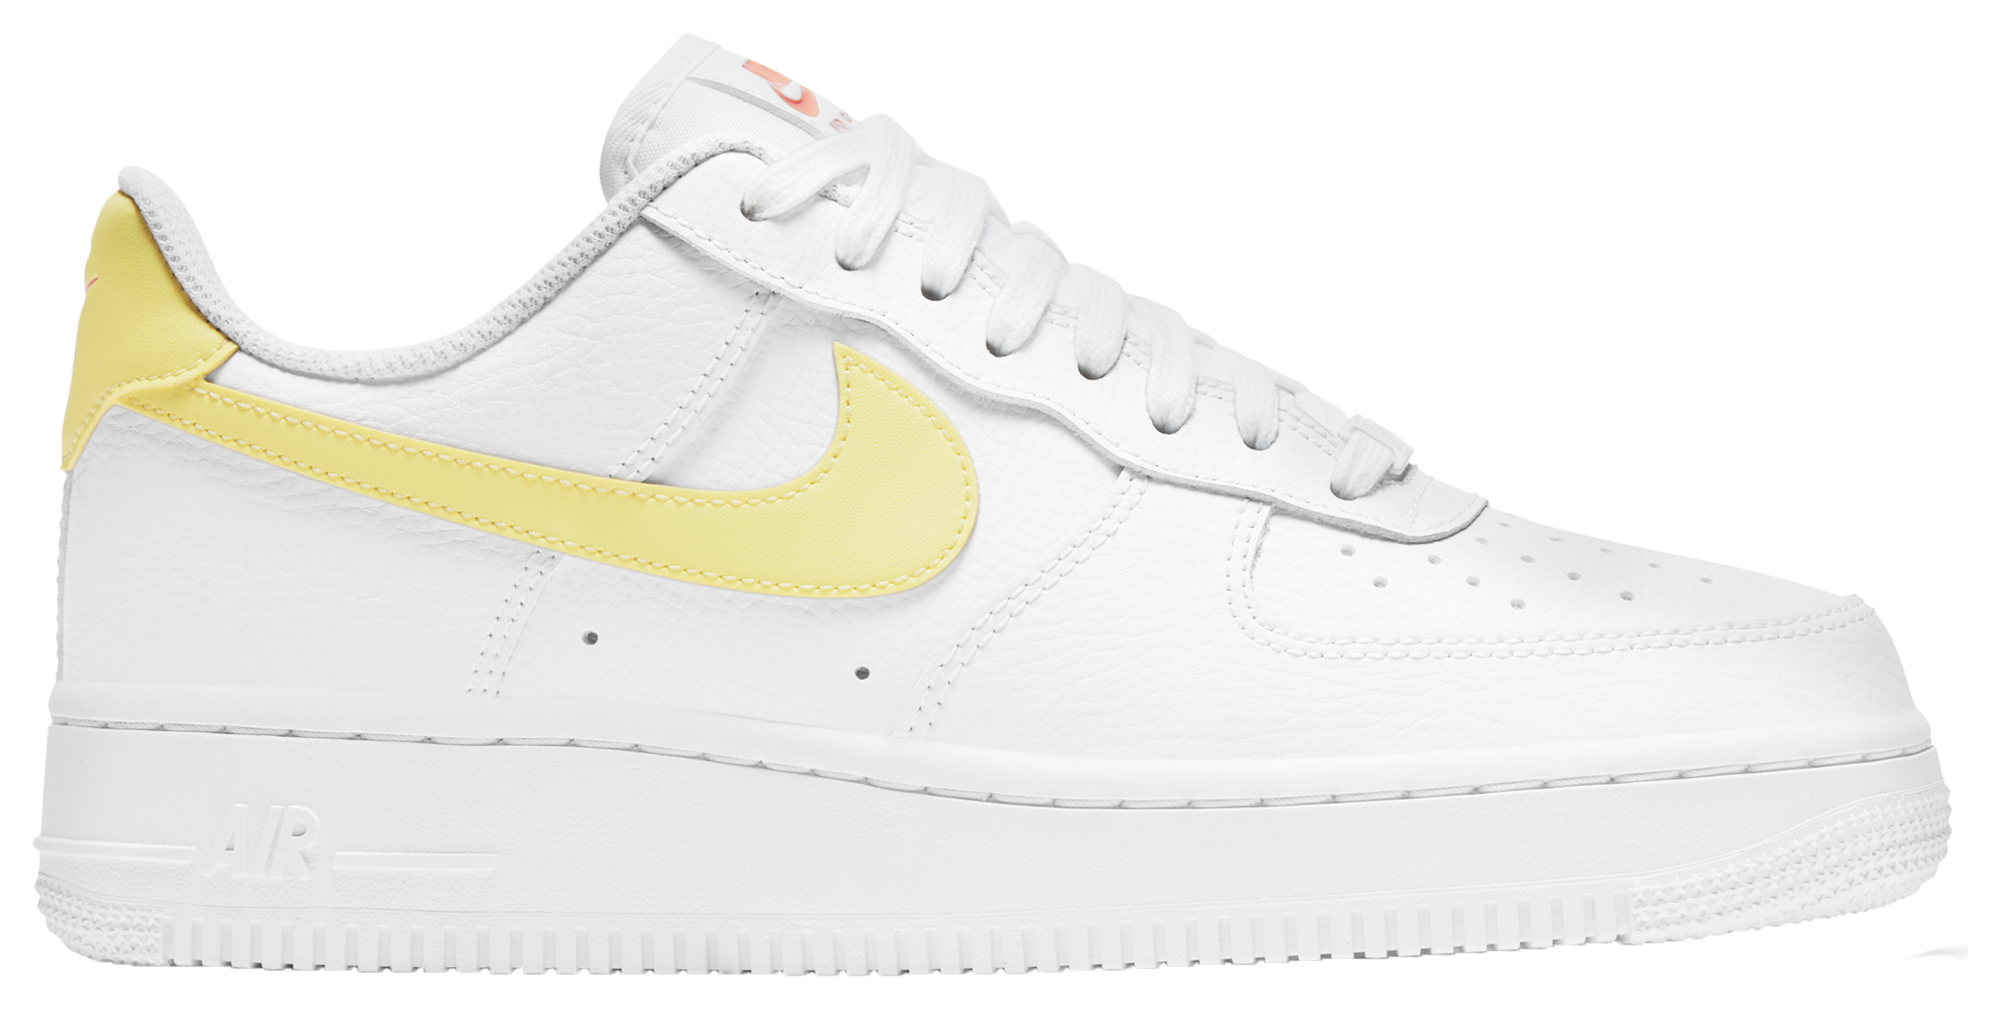 nike air force 1 07 le low white